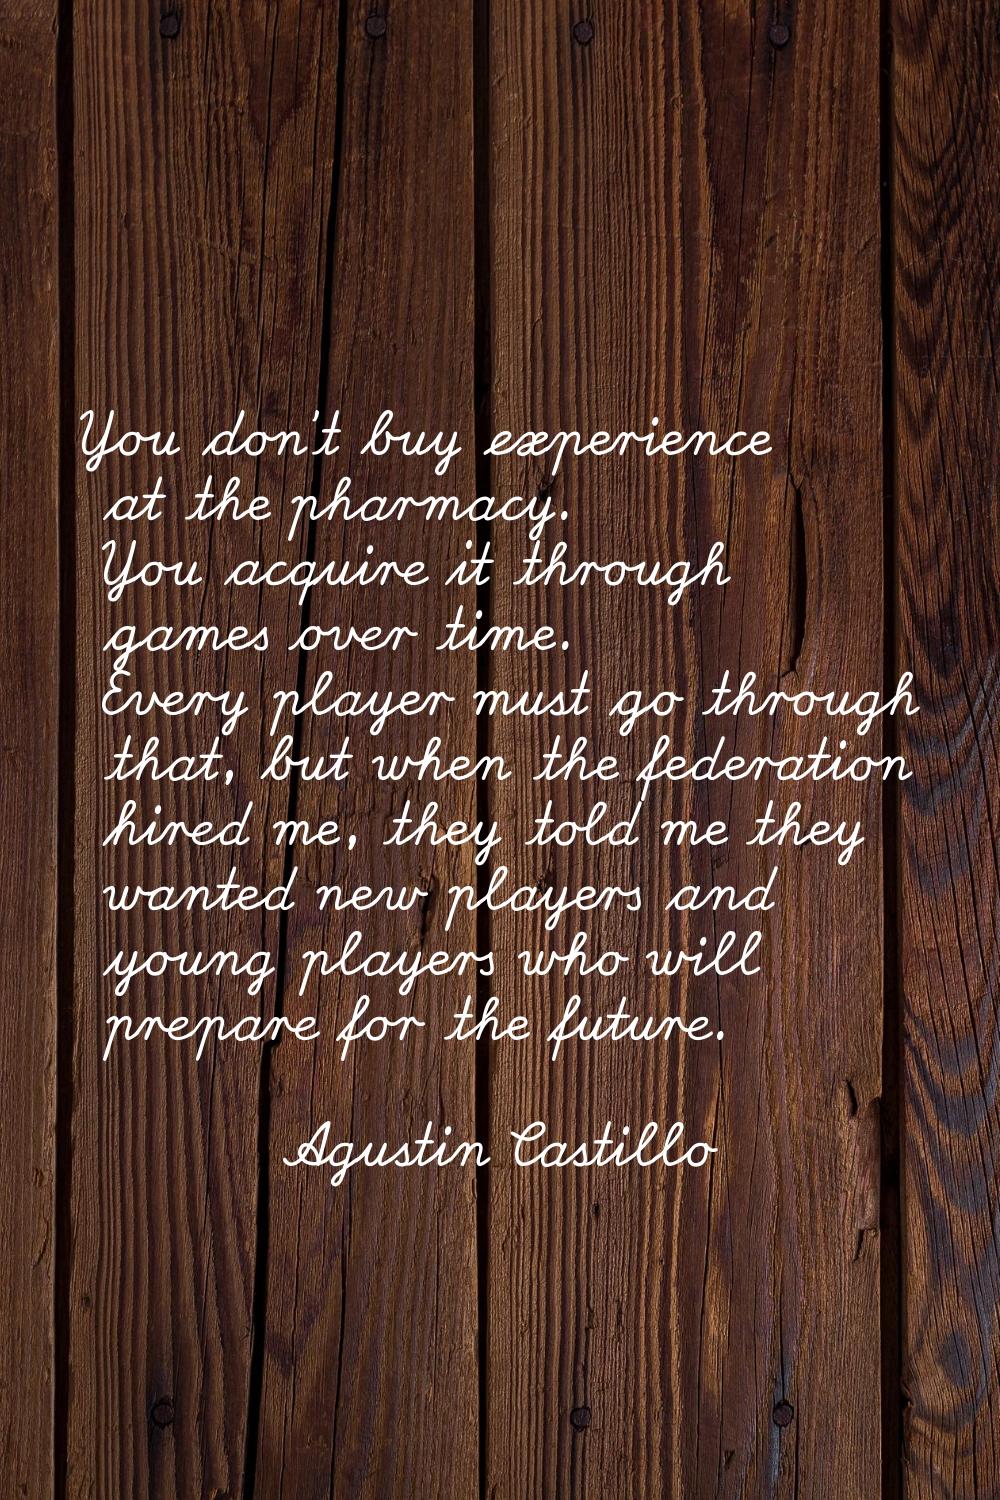 You don't buy experience at the pharmacy. You acquire it through games over time. Every player must